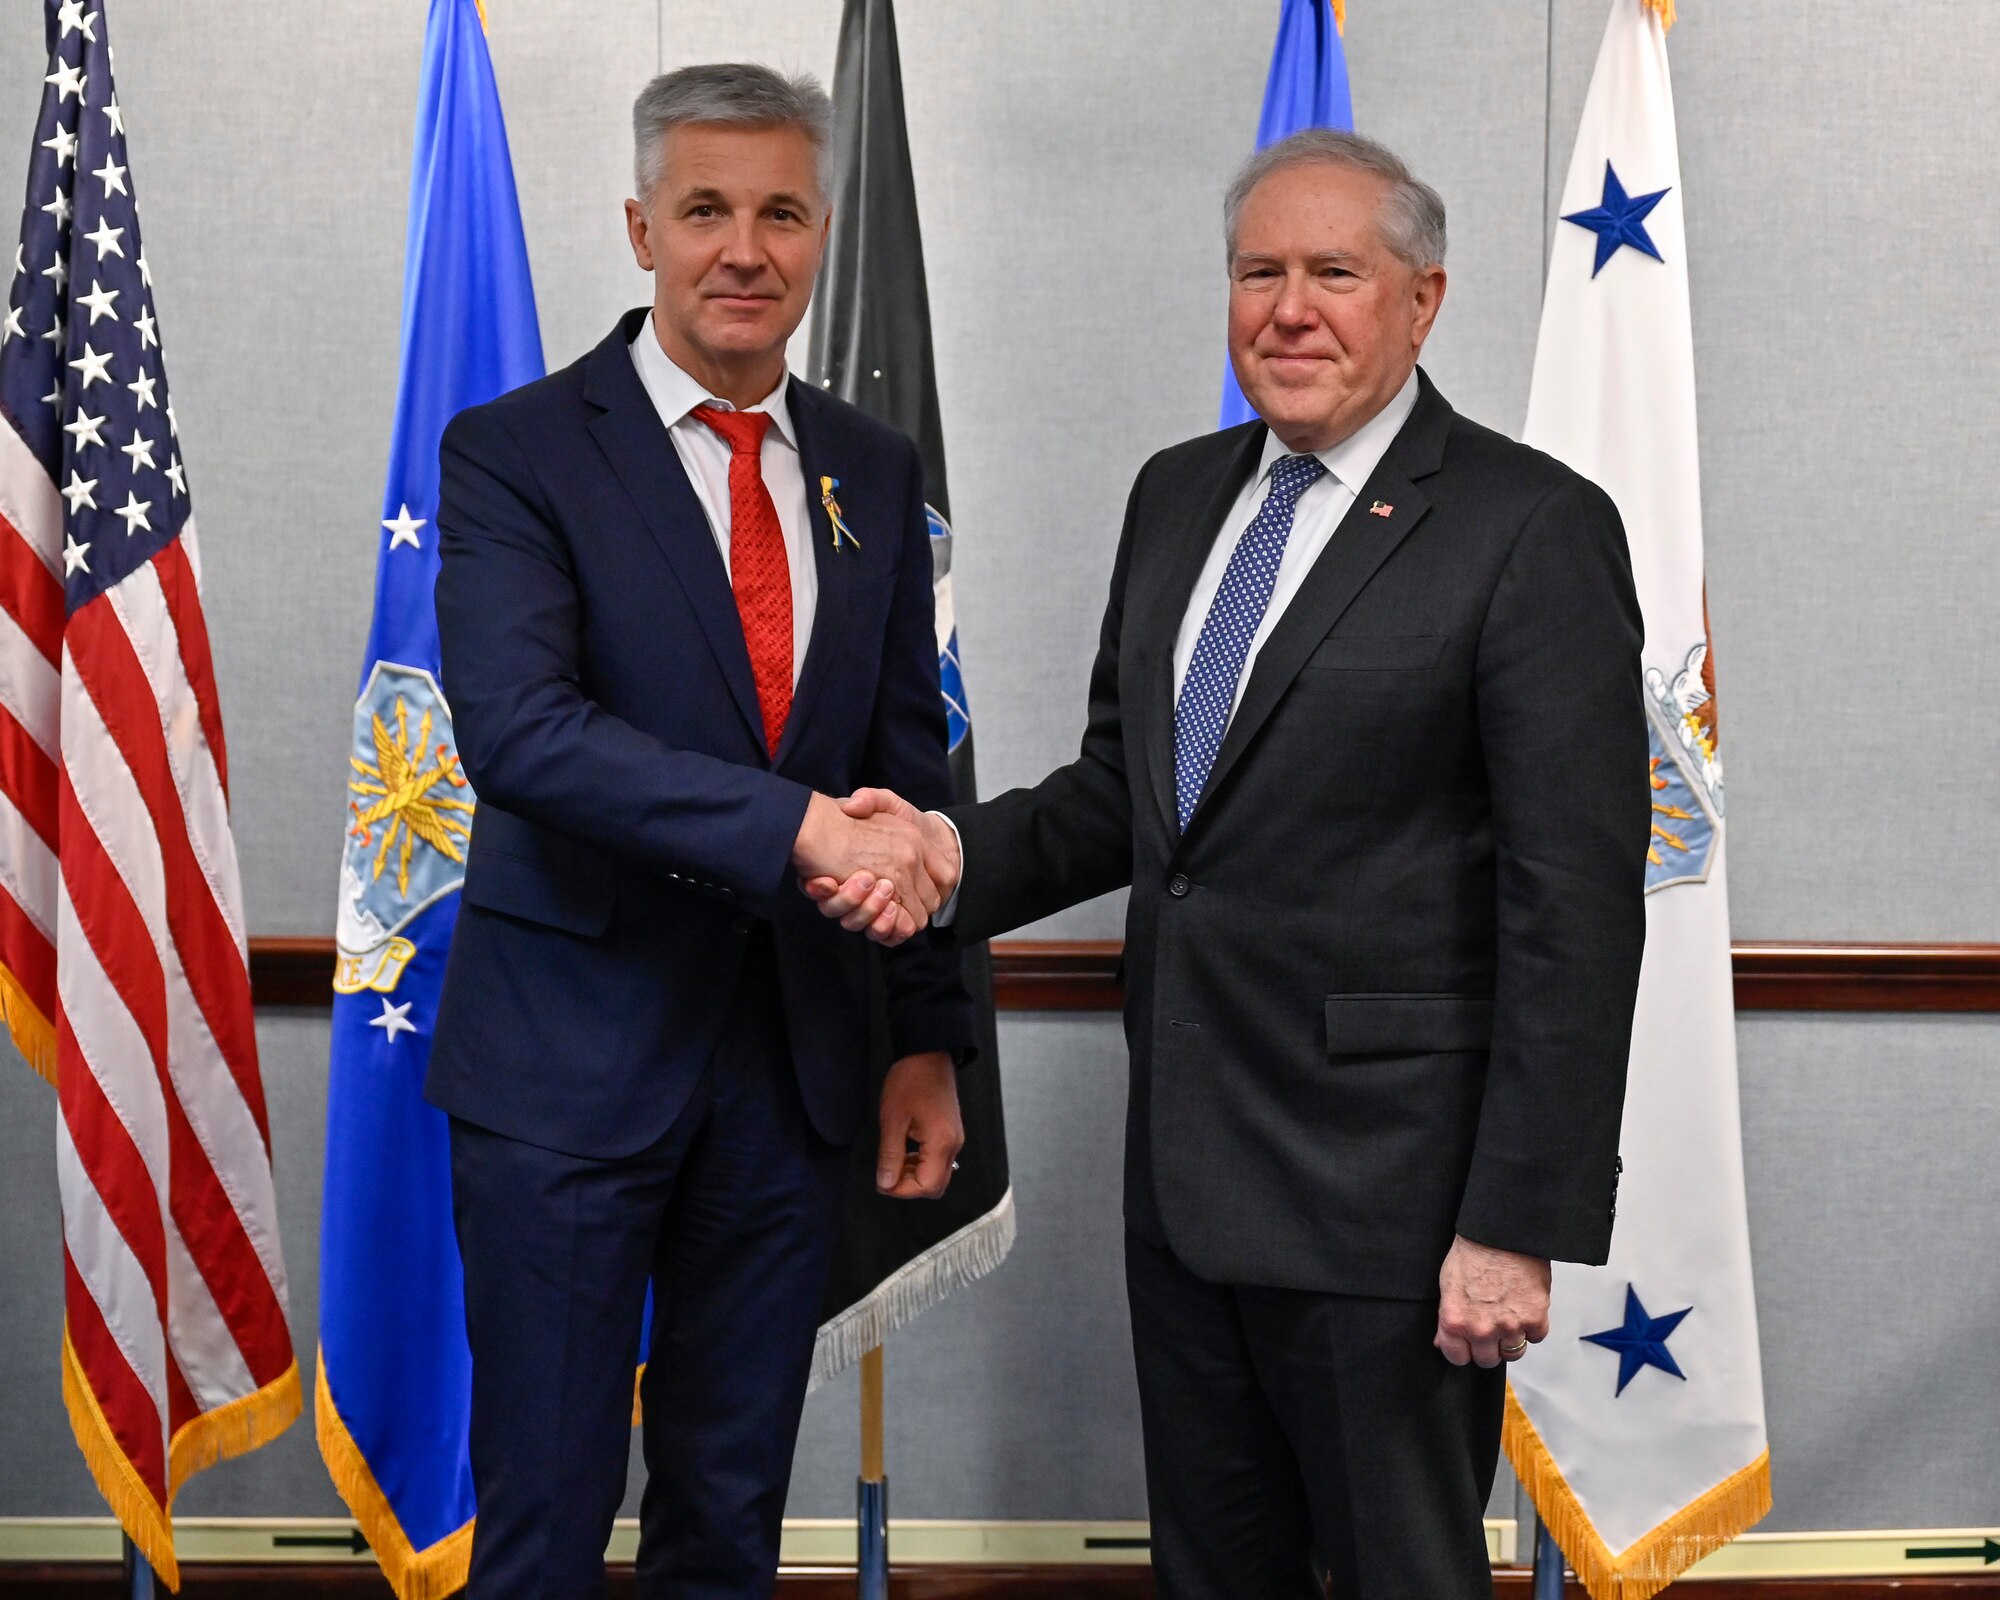 Dr. Artis Pabriks, left, minister of defense and deputy prime minister of Latvia, poses with Secretary of the Air Force Frank Kendall.